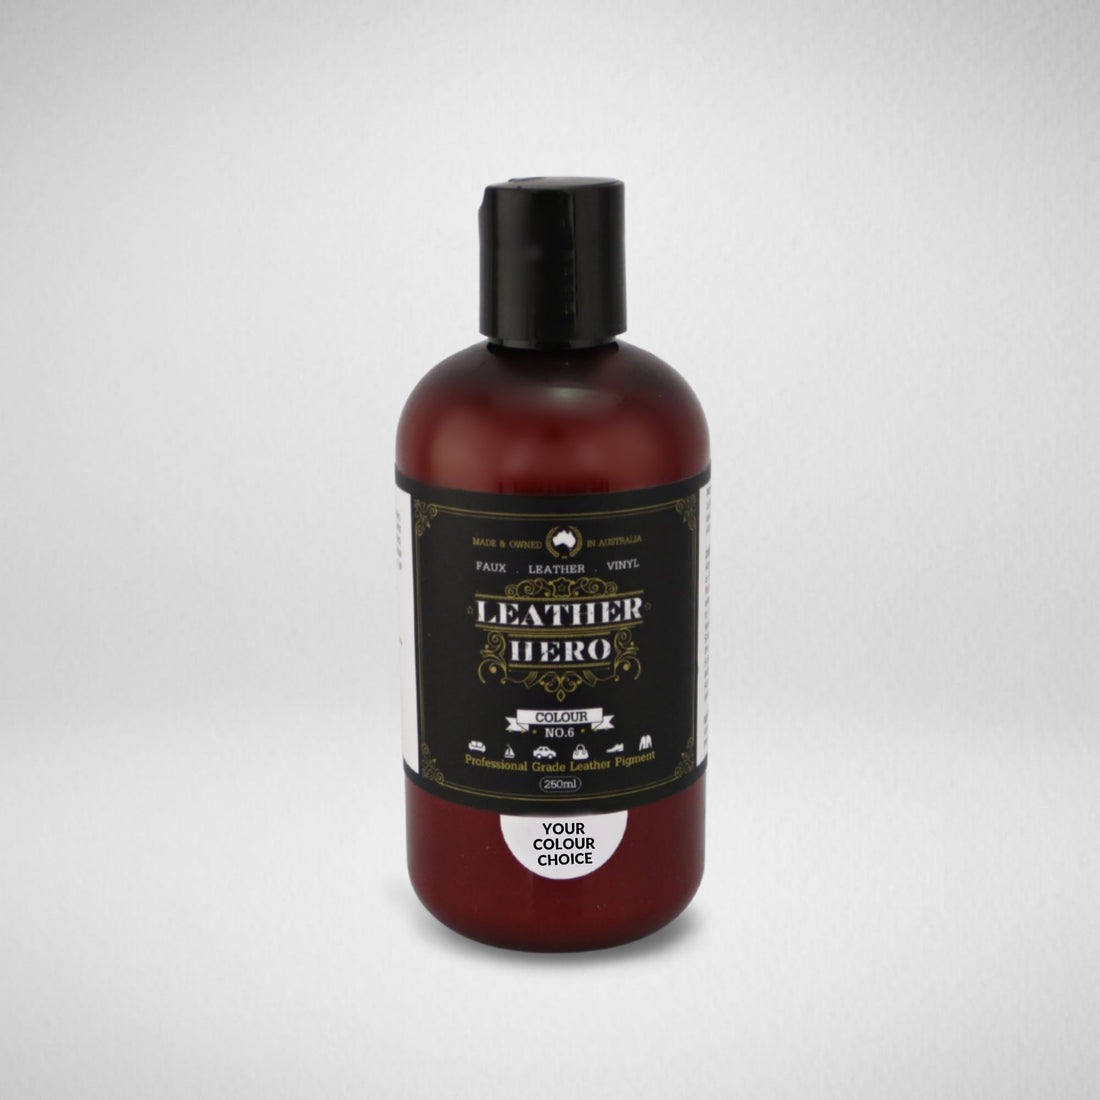 Leather Paint - Midnight Leather Repair & Recolouring Leather Hero Australia